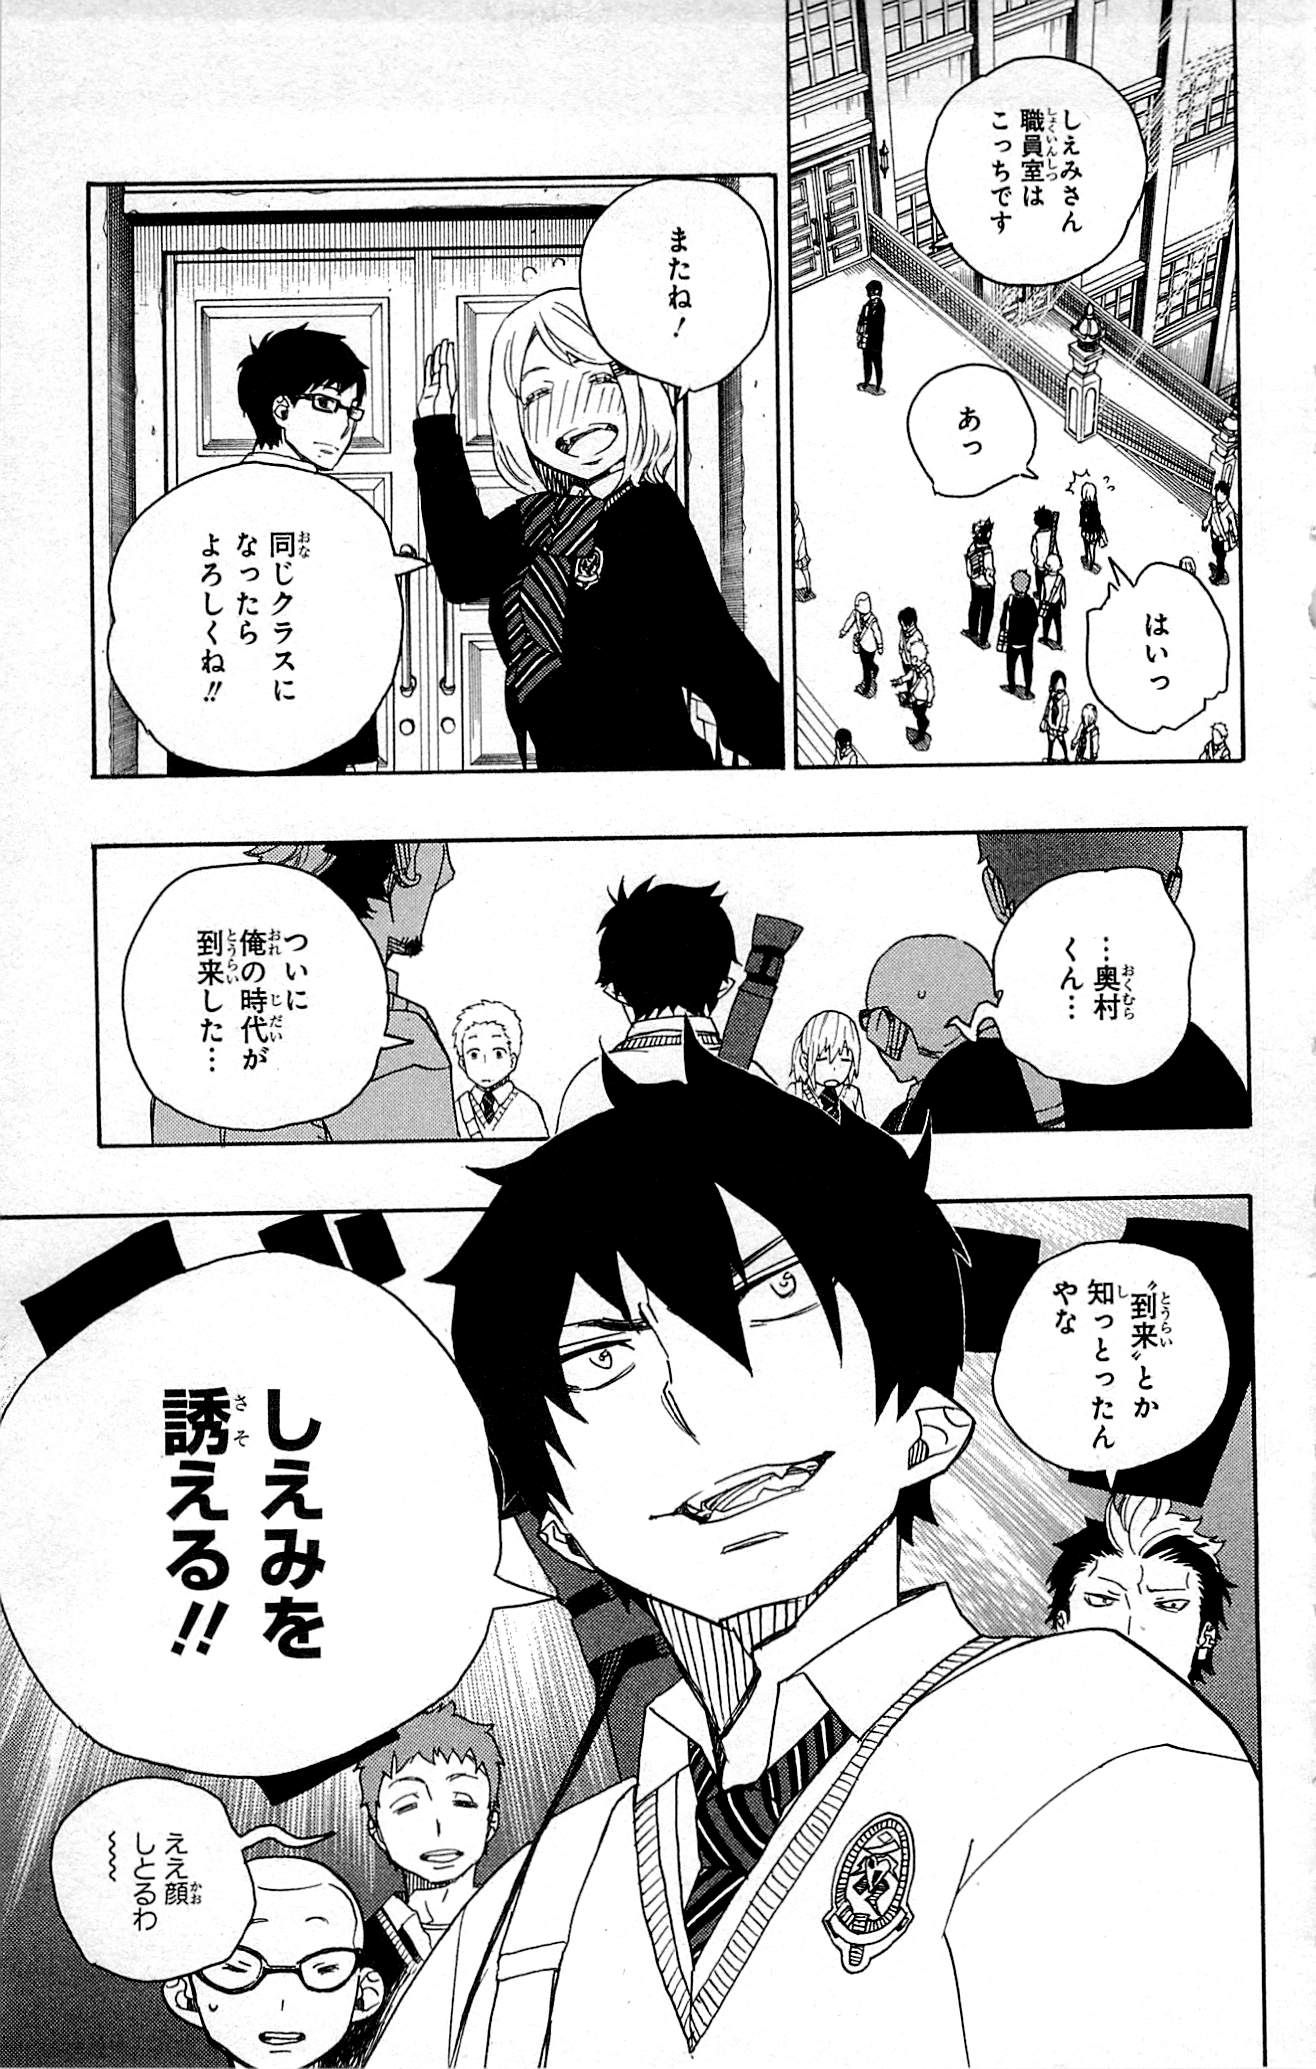 Ao no Exorcist - Chapter 45 - Page 25